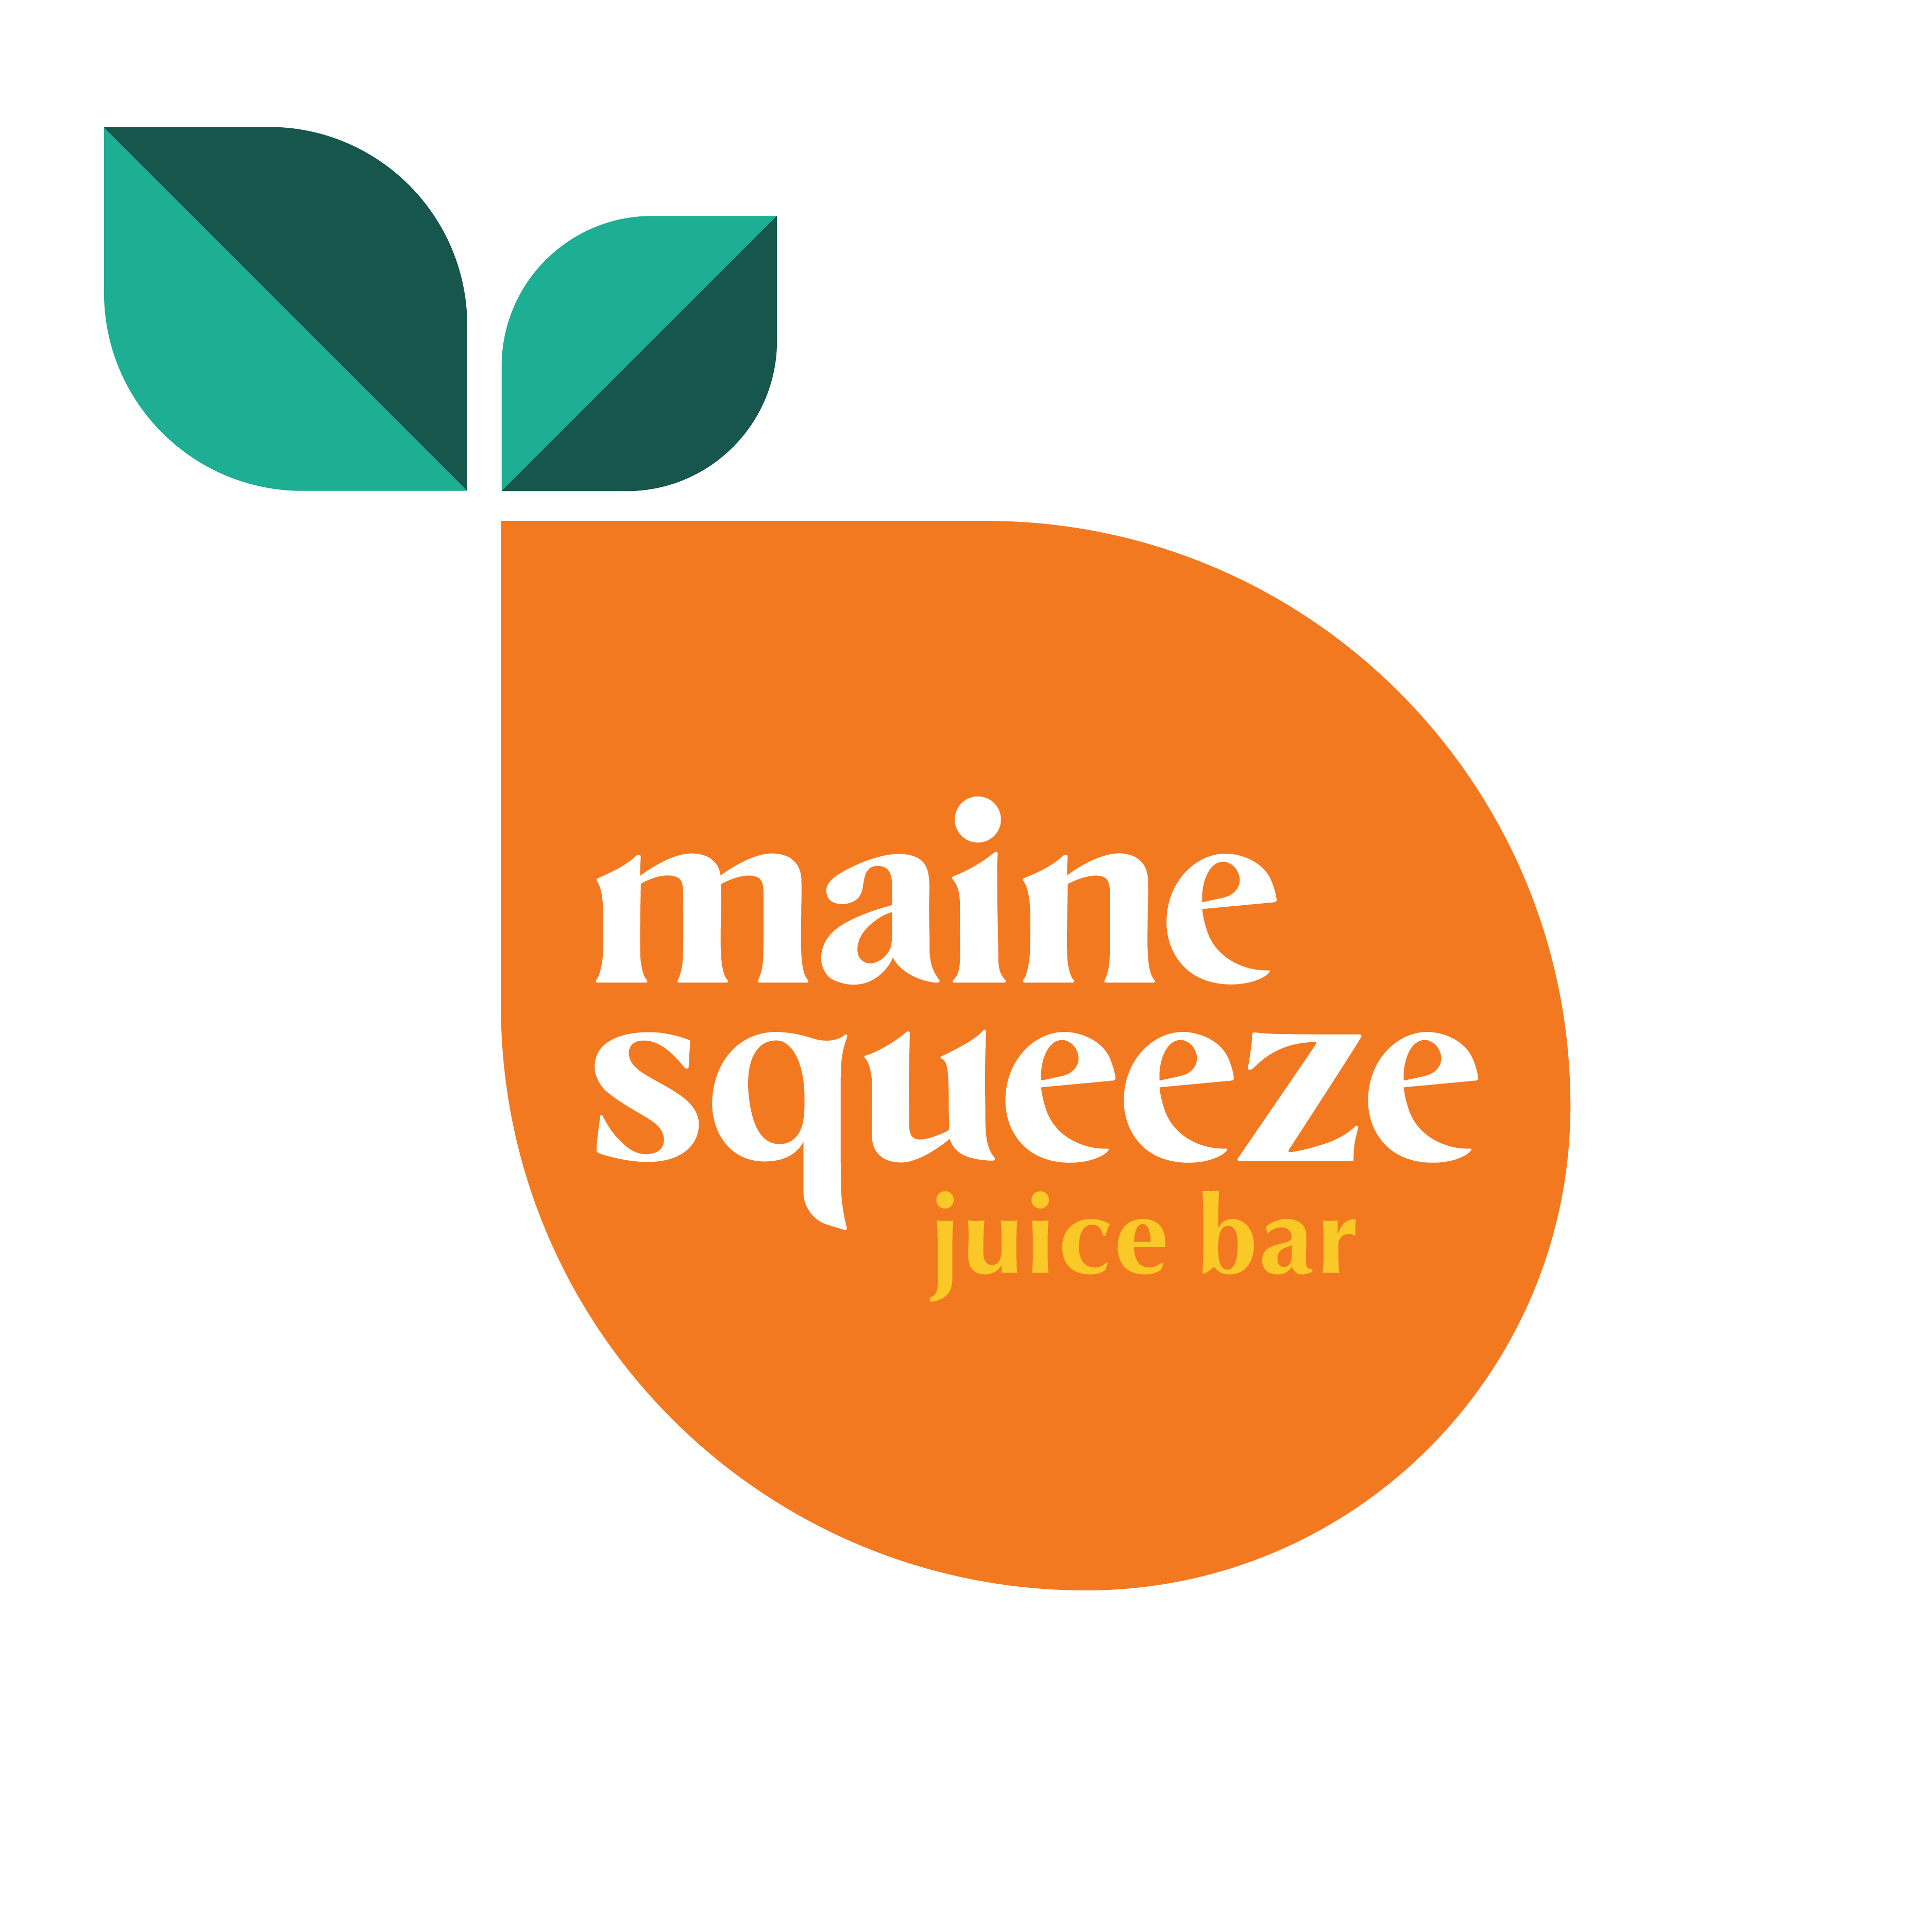 Maine Squeeze Logo logo design by logo designer Stefanie Passo for your inspiration and for the worlds largest logo competition